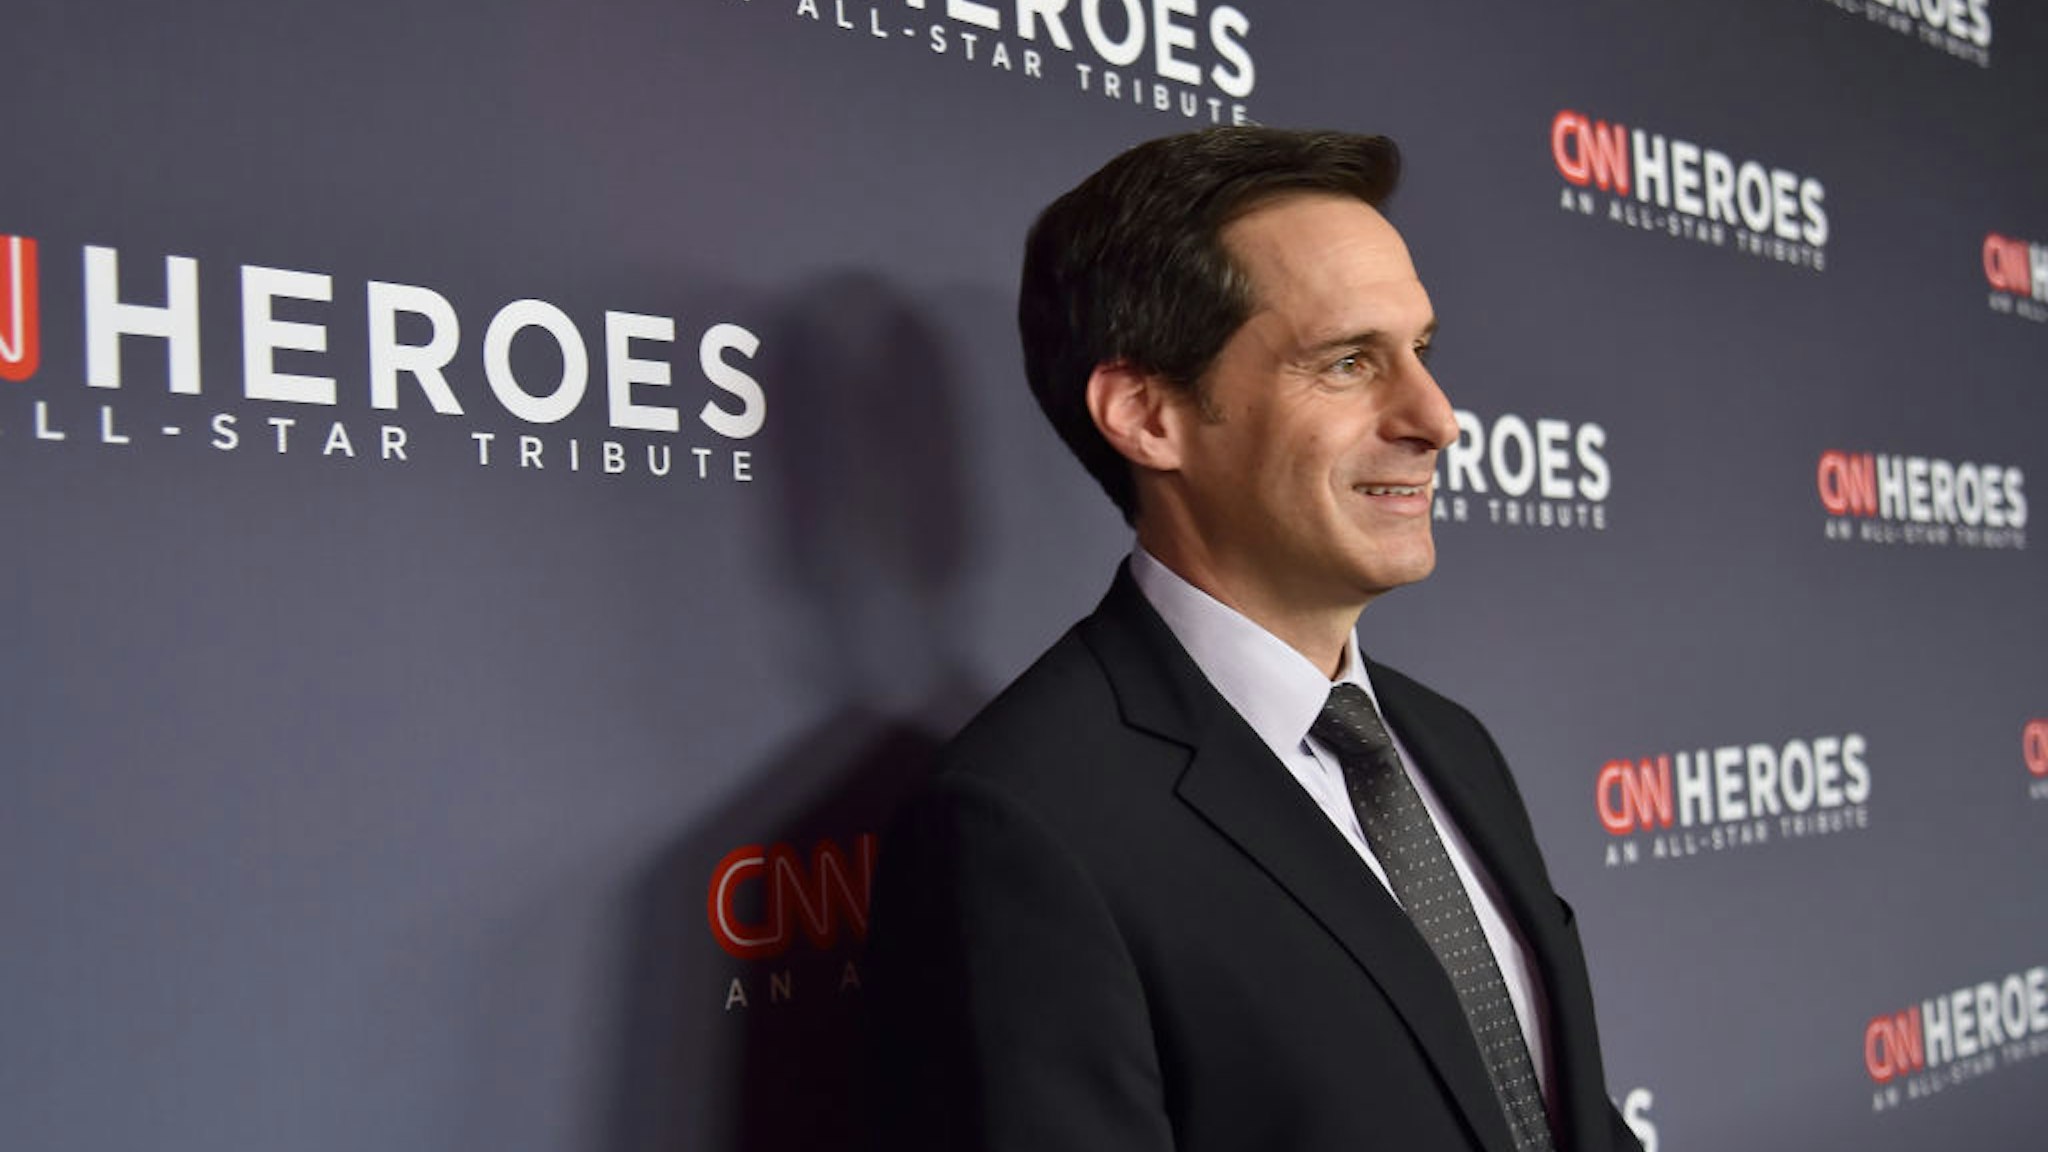 NEW YORK, NY - DECEMBER 17: Anchor John Berman attends CNN Heroes 2017 at the American Museum of Natural History on December 17, 2017 in New York City. 27437_015 (Photo by Kevin Mazur/Getty Images for CNN)